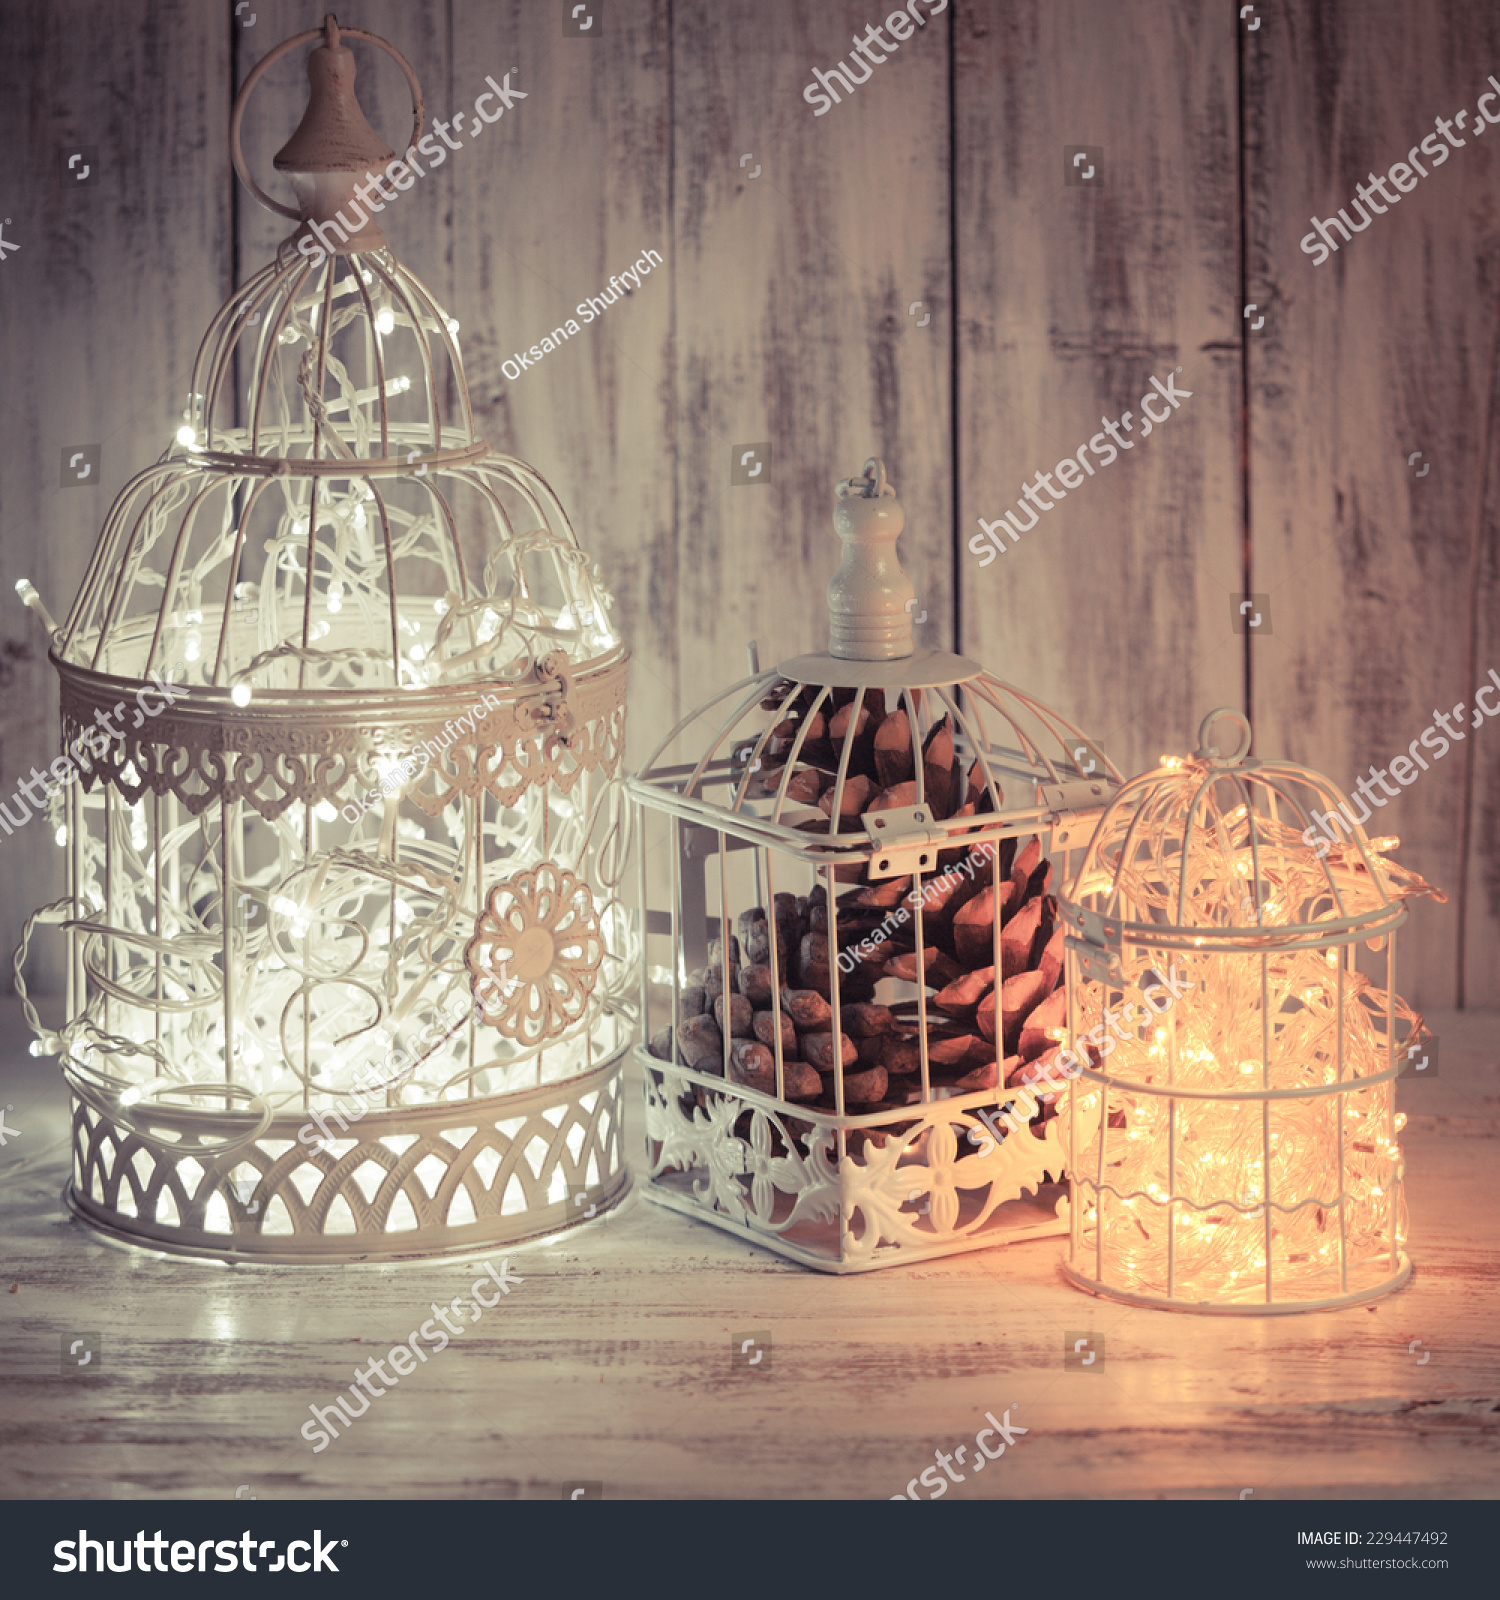 Christmas Light Decoration In A White Stock Photo 229447492